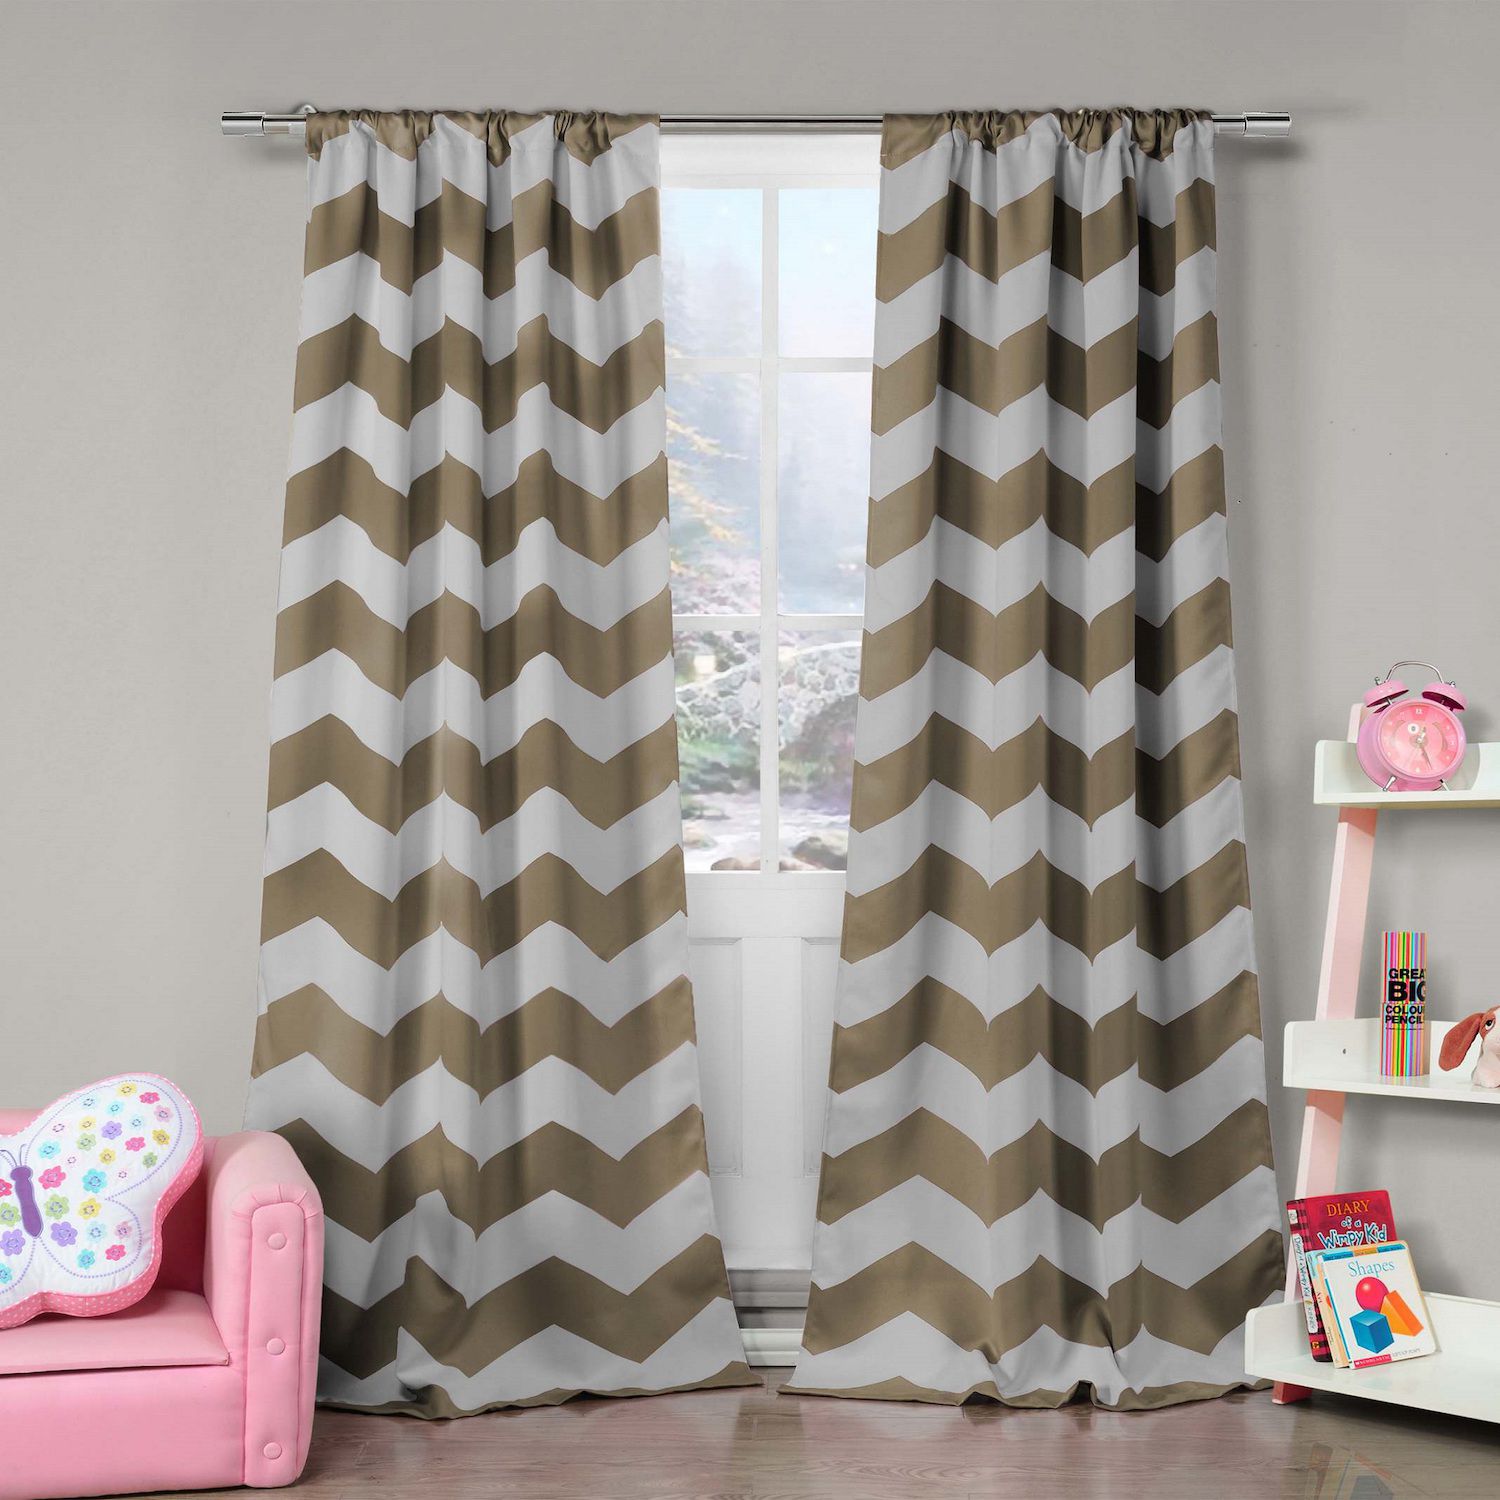 Image for Duck River Textile Fifika Stripe 2-pack Window Curtain Set at Kohl's.